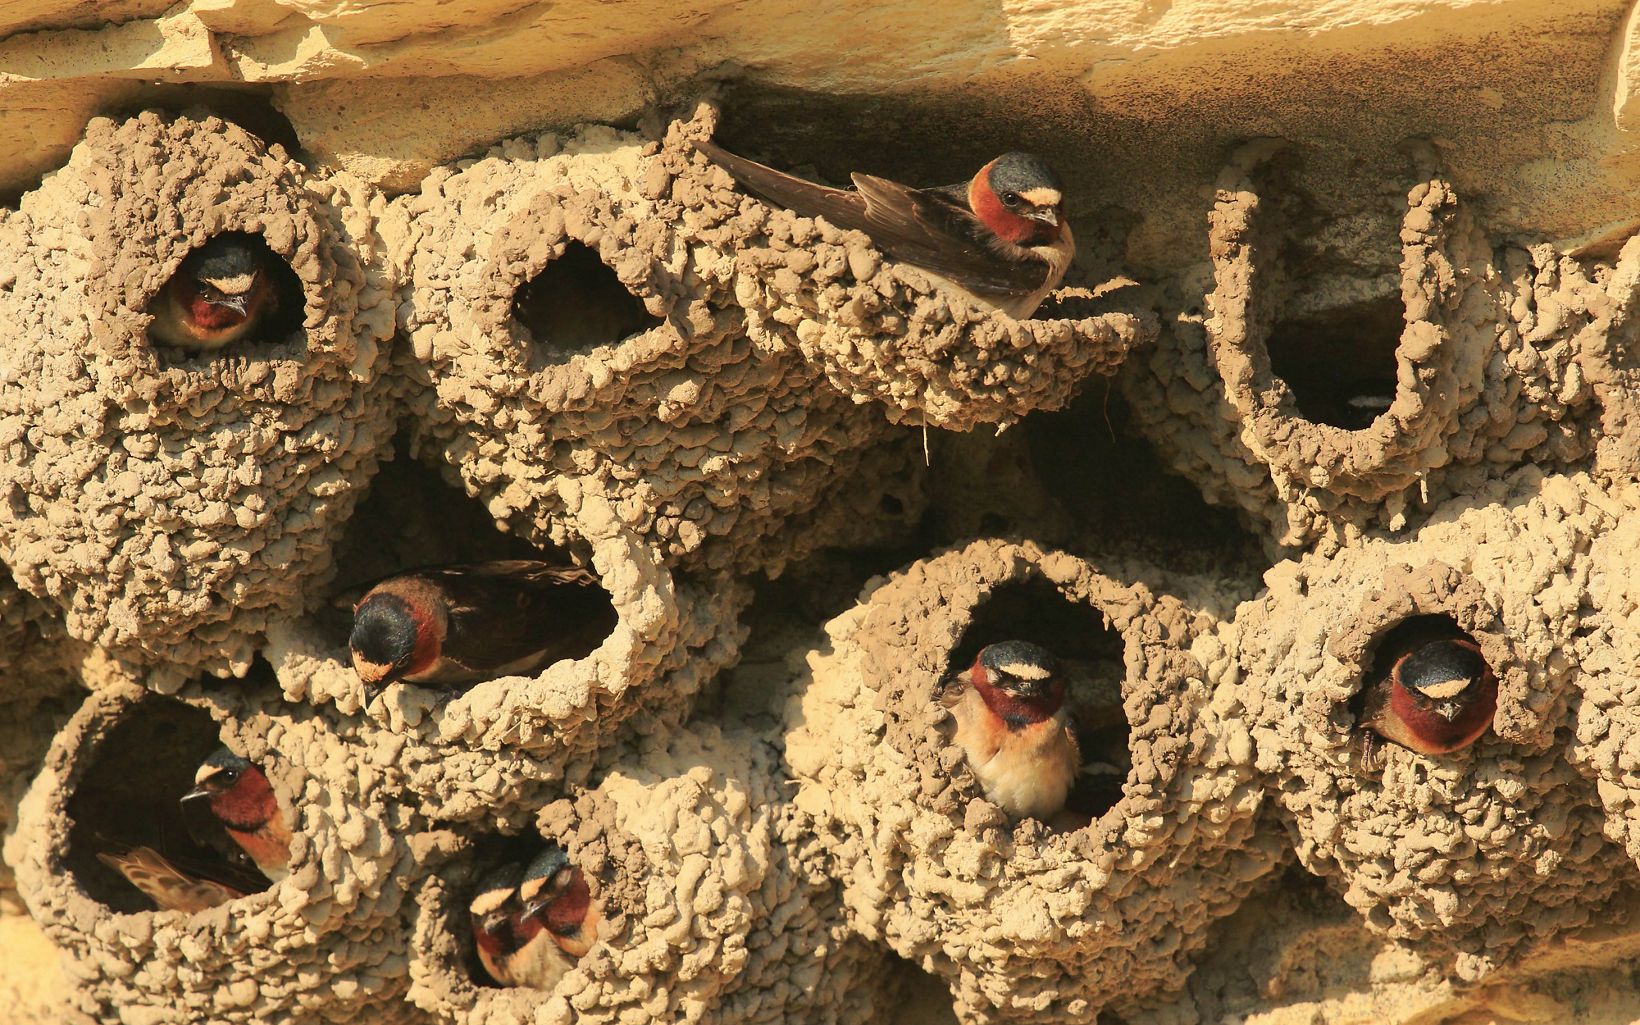 
                
                  Cliff Swallows These cliff swallows and their mud nests are a common sight near the tops of rock formations in Little Jerusalem Badlands State Park.
                  © Bob Gress
                
              